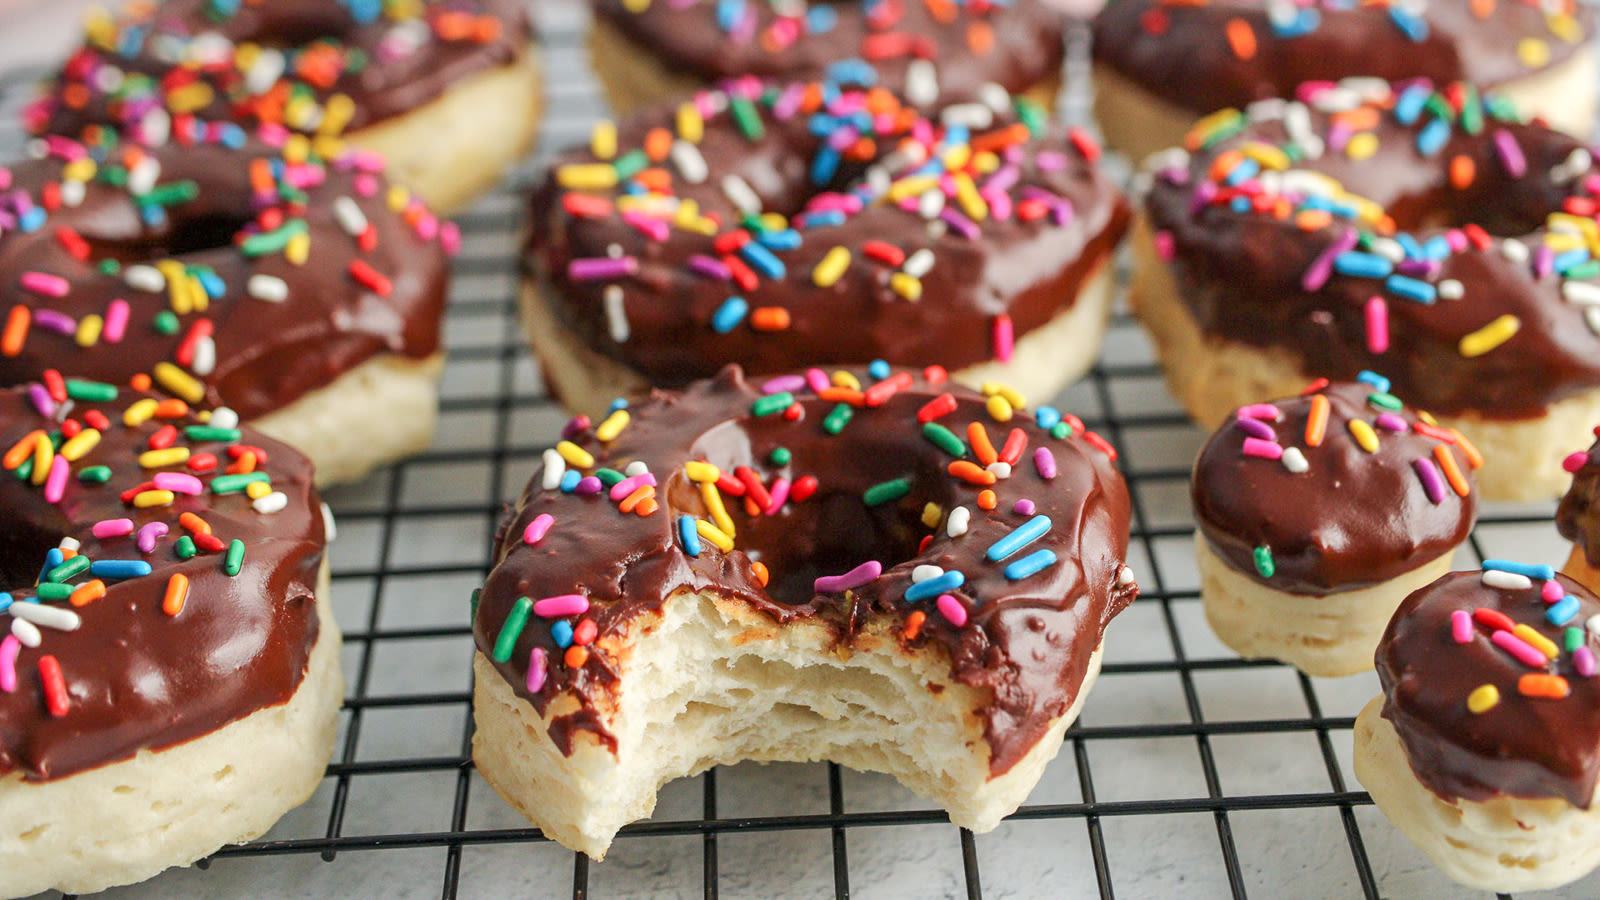 The Air Fryer Is A Perfect Appliance For Making Homemade Donuts